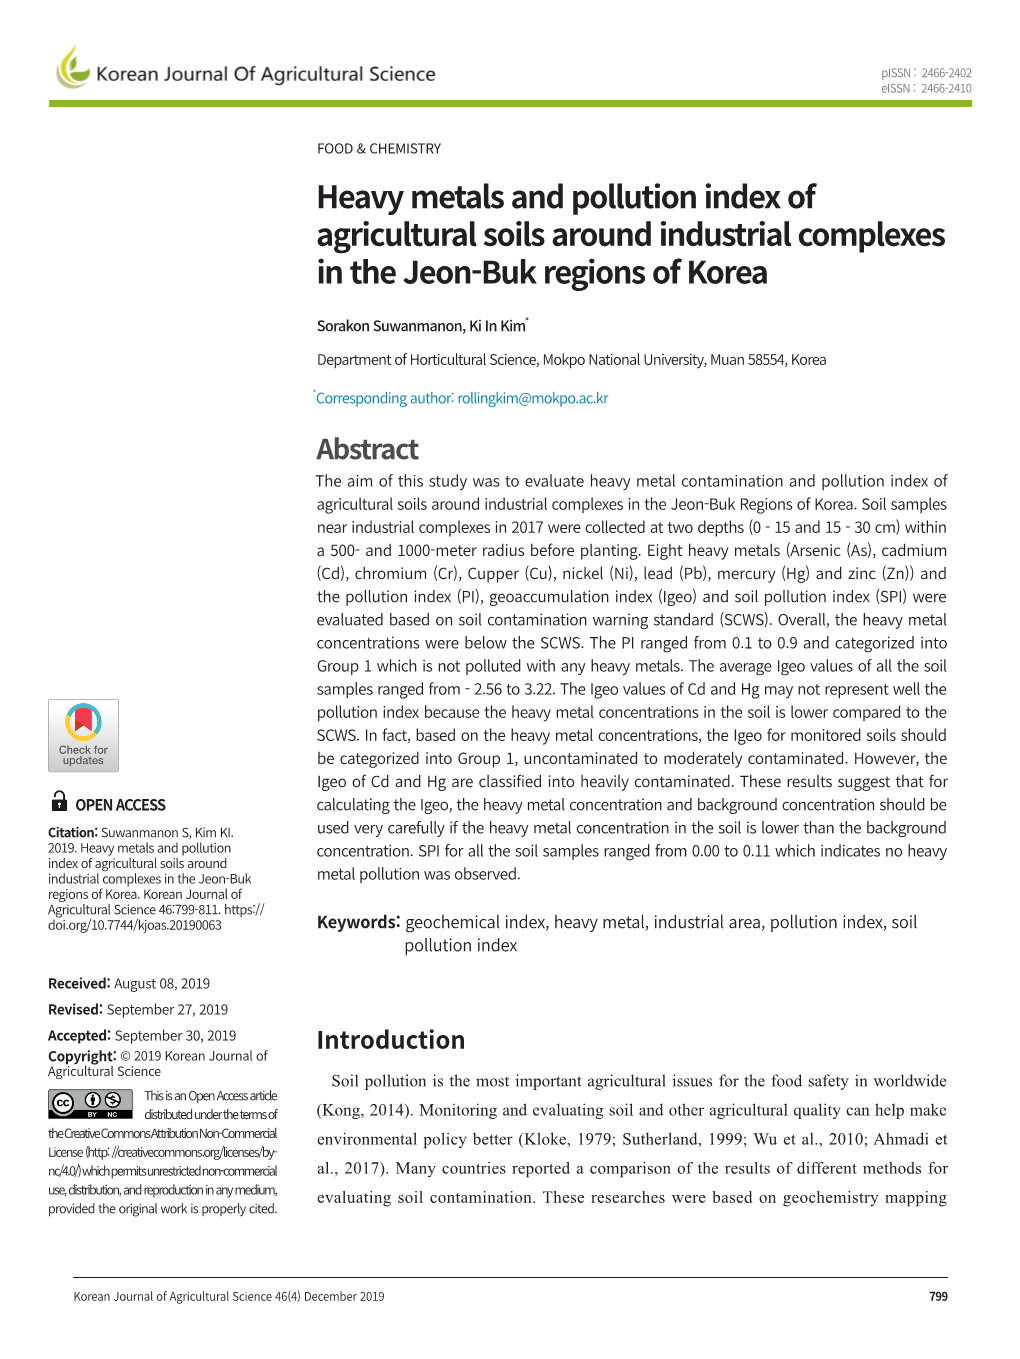 Heavy Metals and Pollution Index of Agricultural Soils Around Industrial Complexes in the Jeon-Buk Regions of Korea